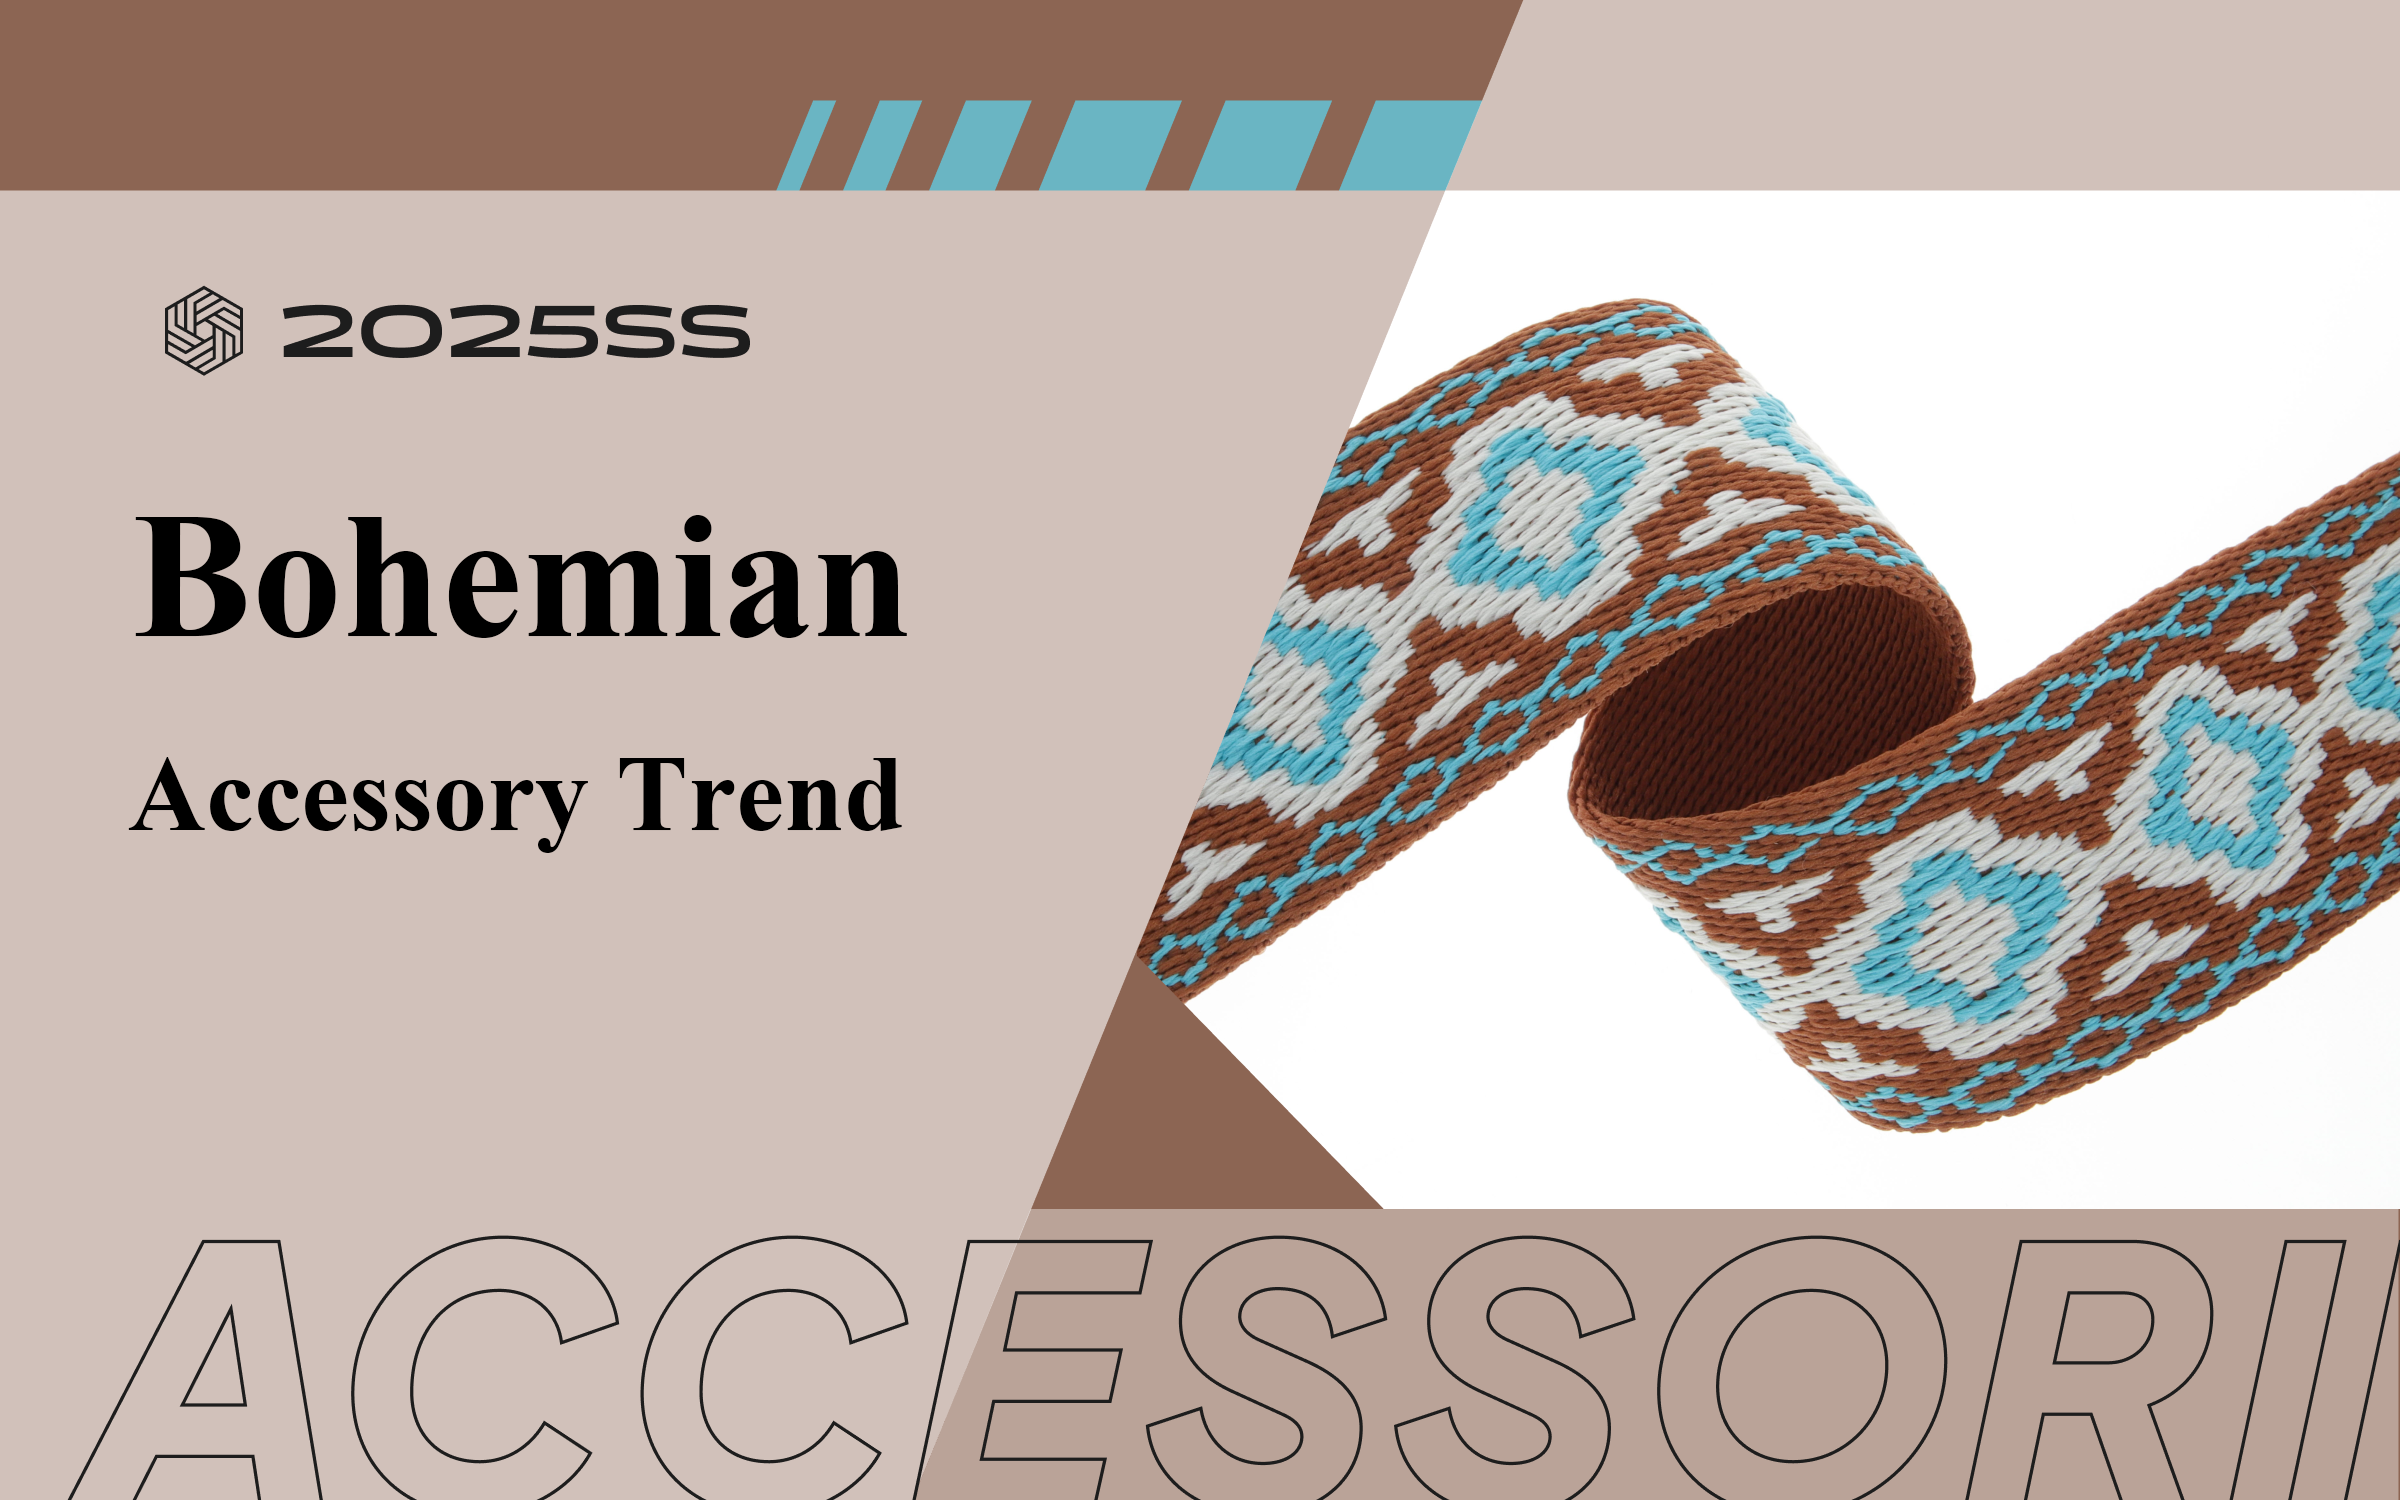 Bohemian Style -- The Accessory Trend